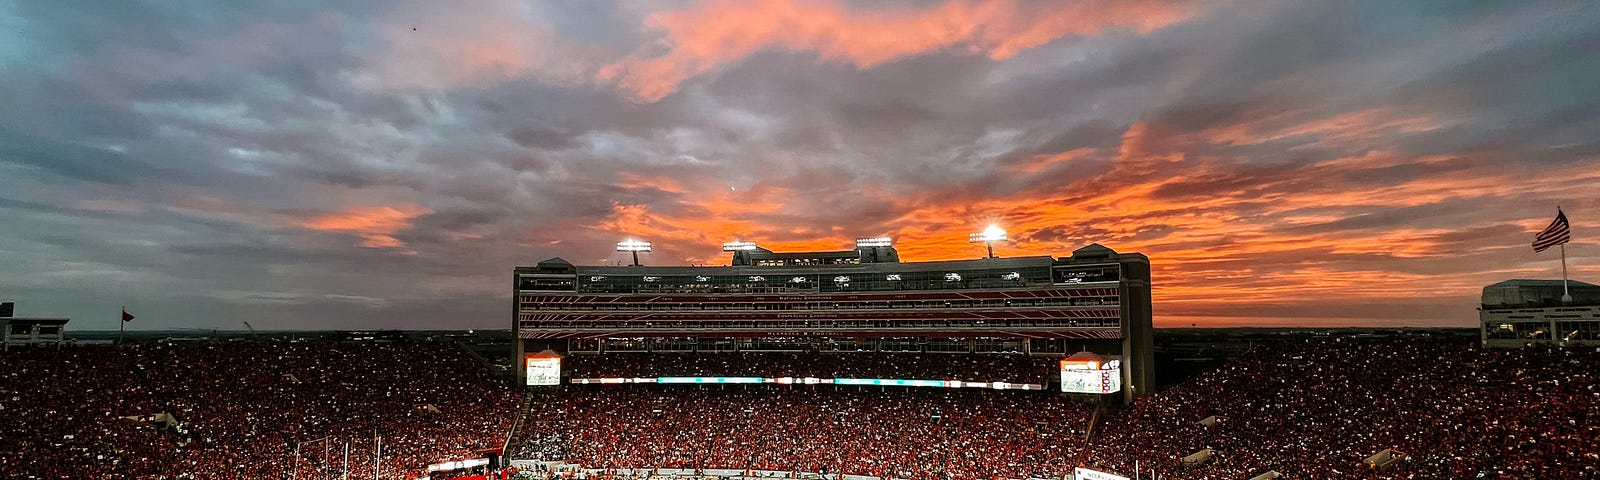 The sun sets during a sold-out Husker Football game